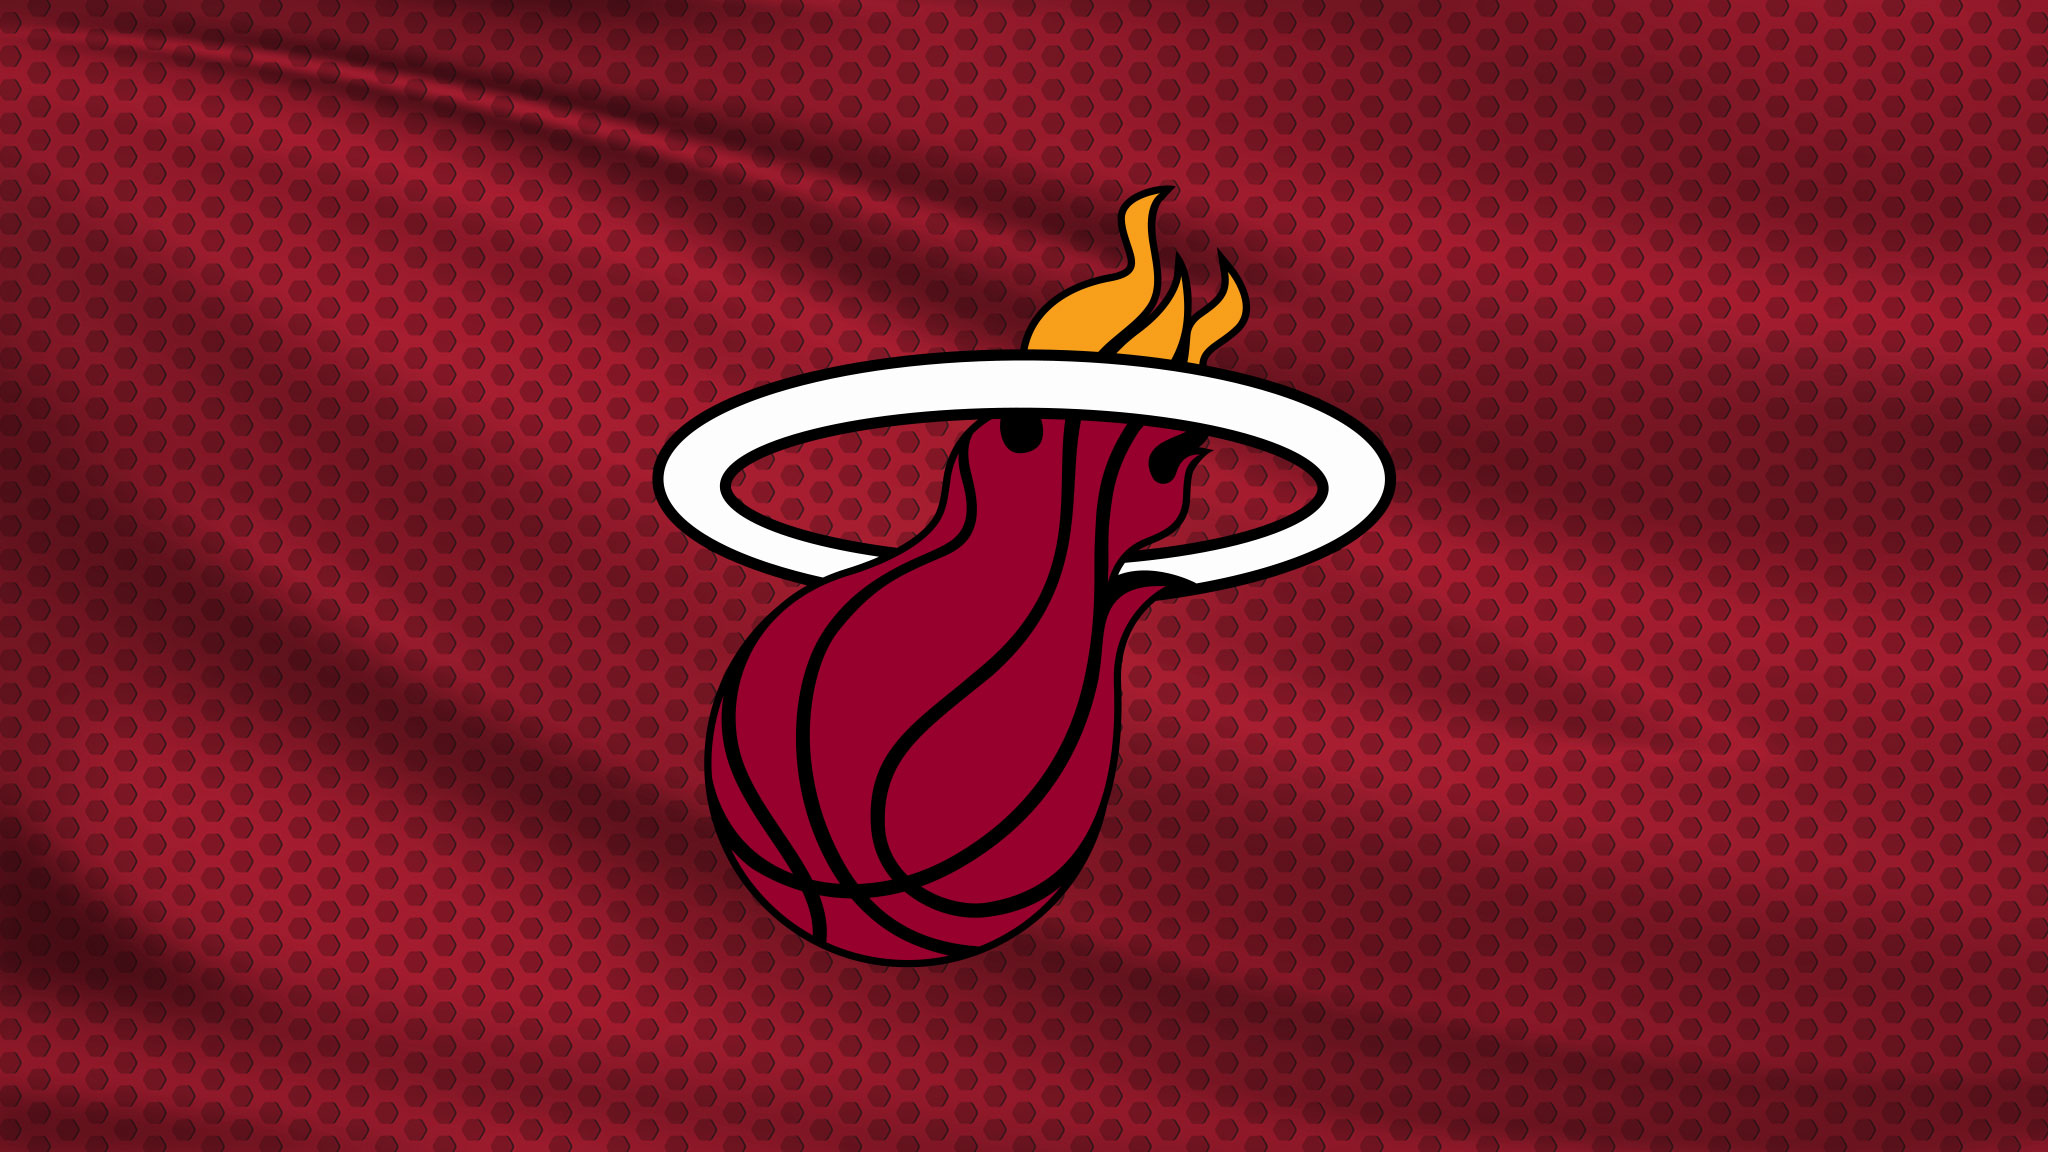 East Conf Semis: TBD at Heat: Rd 2 Home Game 3 (if necessary)